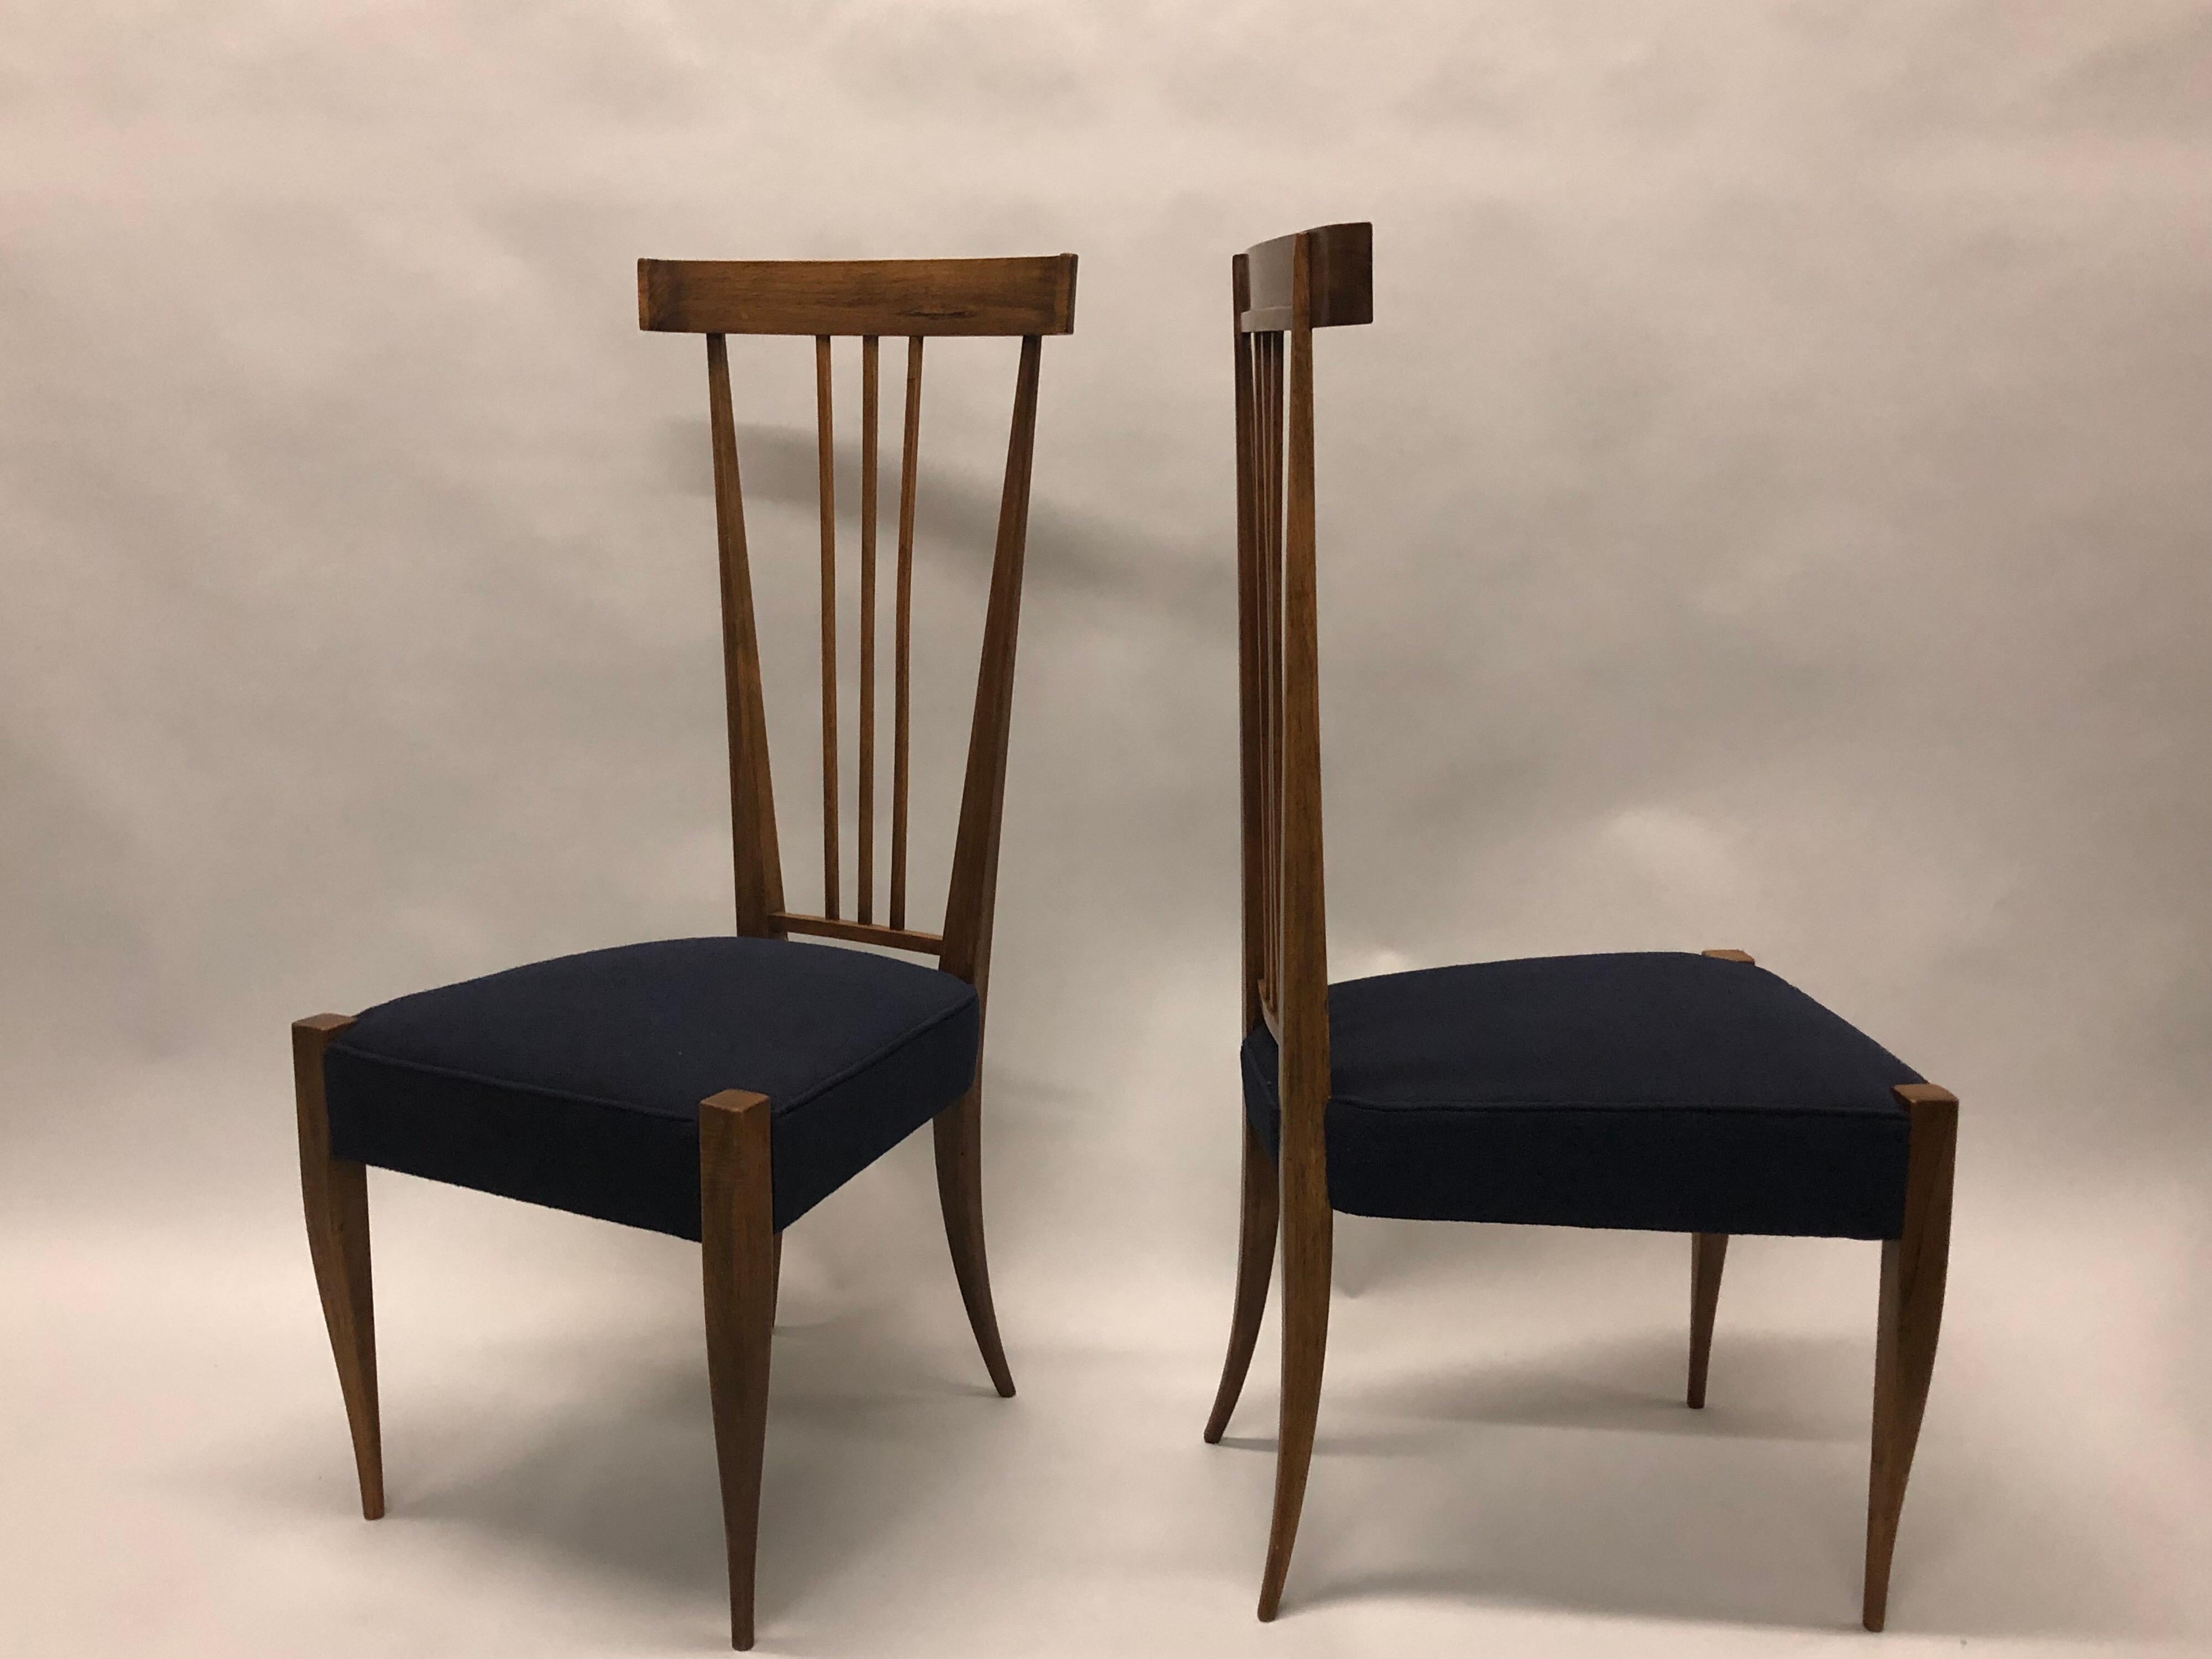 Elegant, sober and dramatic pair of Italian Mid-Century Modern Neoclassical walnut side chairs from circle of Gio Ponti, Italy, circa 1950. A combination of beautiful form, lines and a unique scale arrive together to create these modern masterpieces